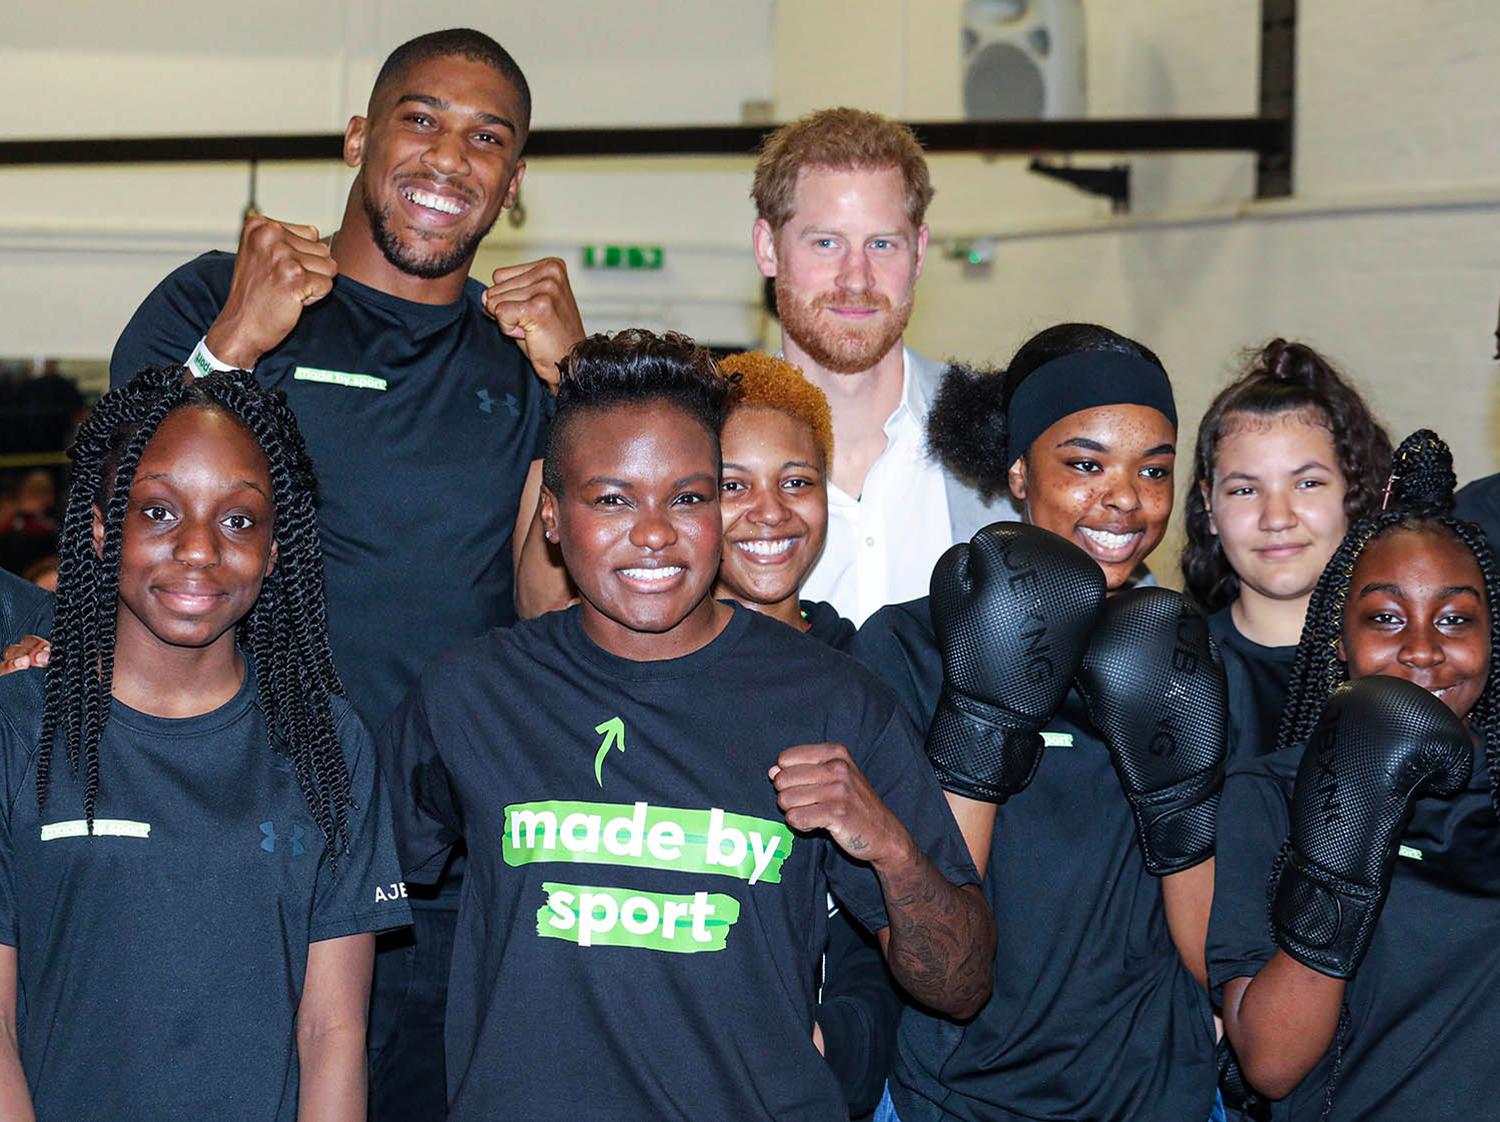 Prince Harry was joined at the launch of the Made By Sport campaign by former world champion boxed Anthony Joshua